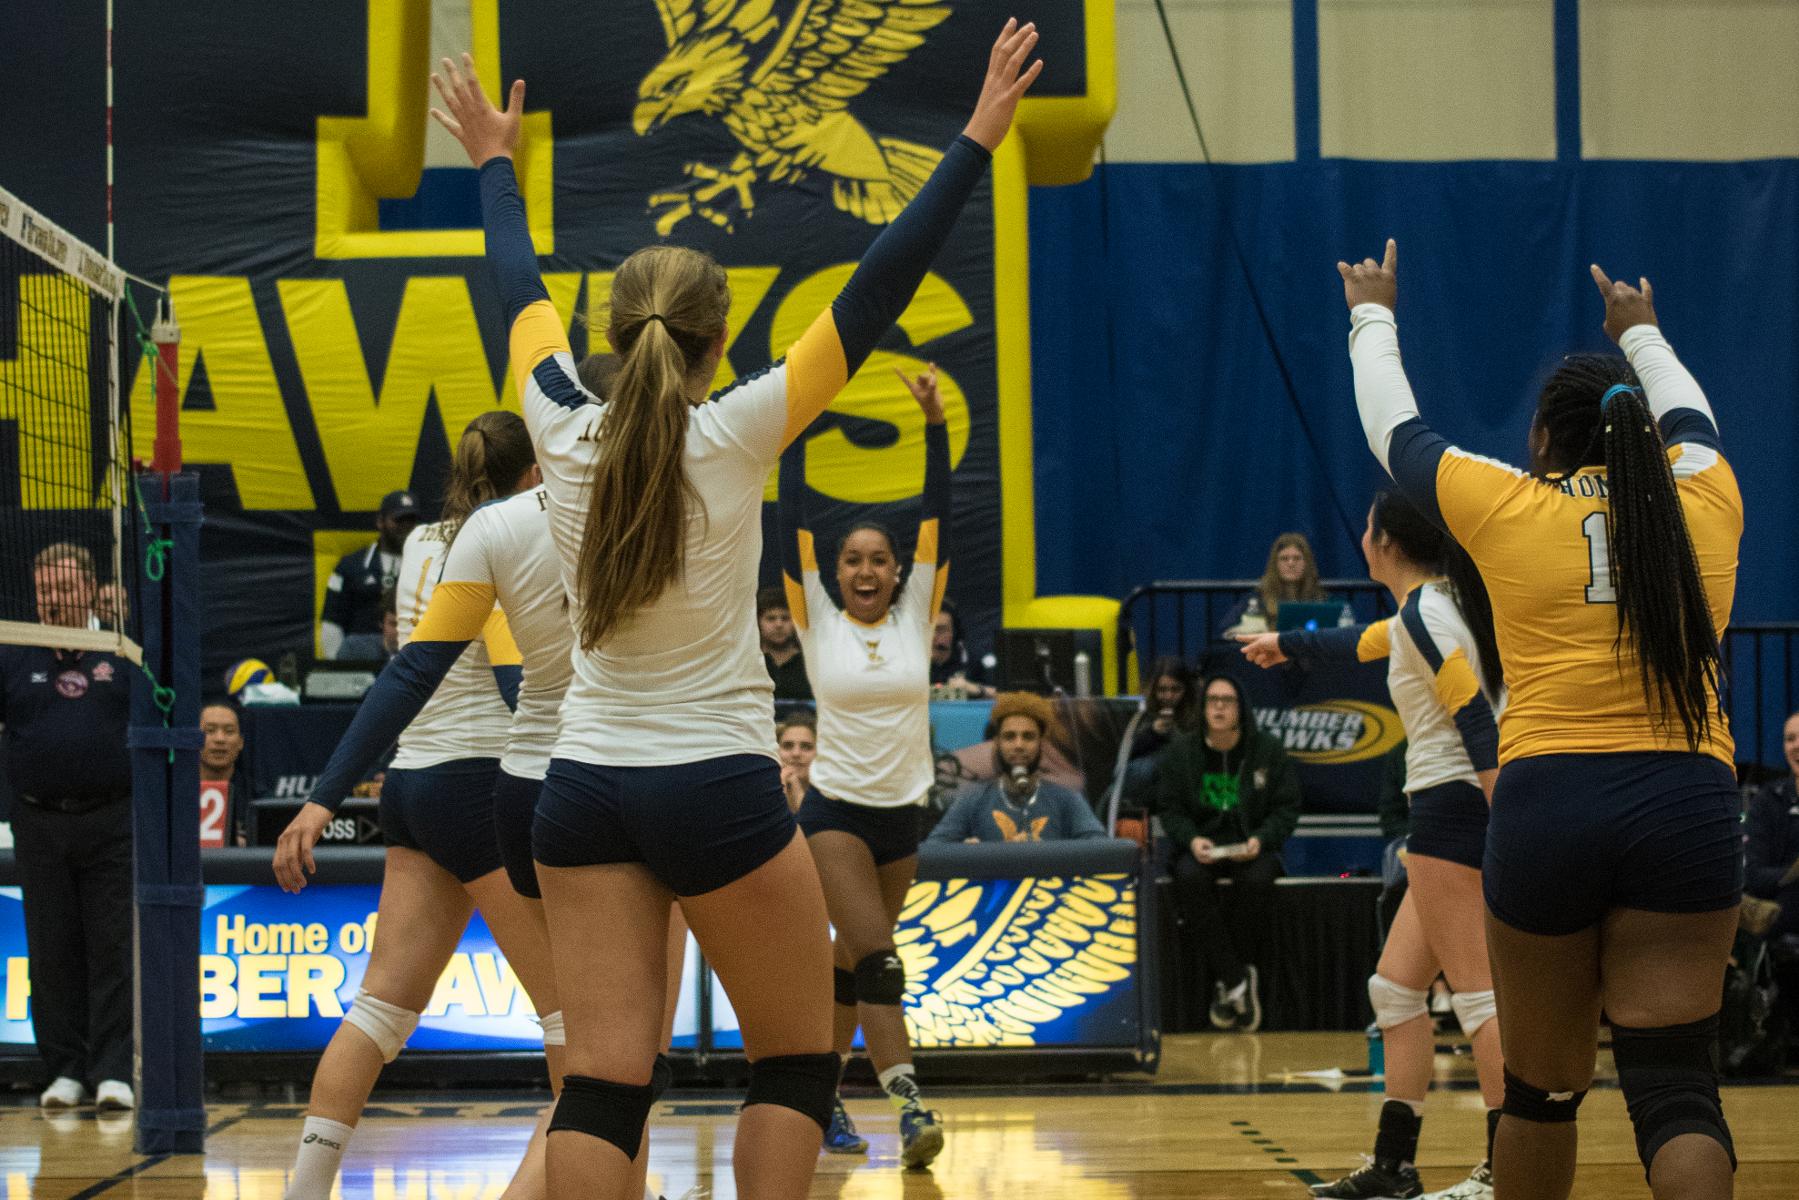 HAWKS SWEEP ST. CLAIR TO REMAIN UNBEATEN